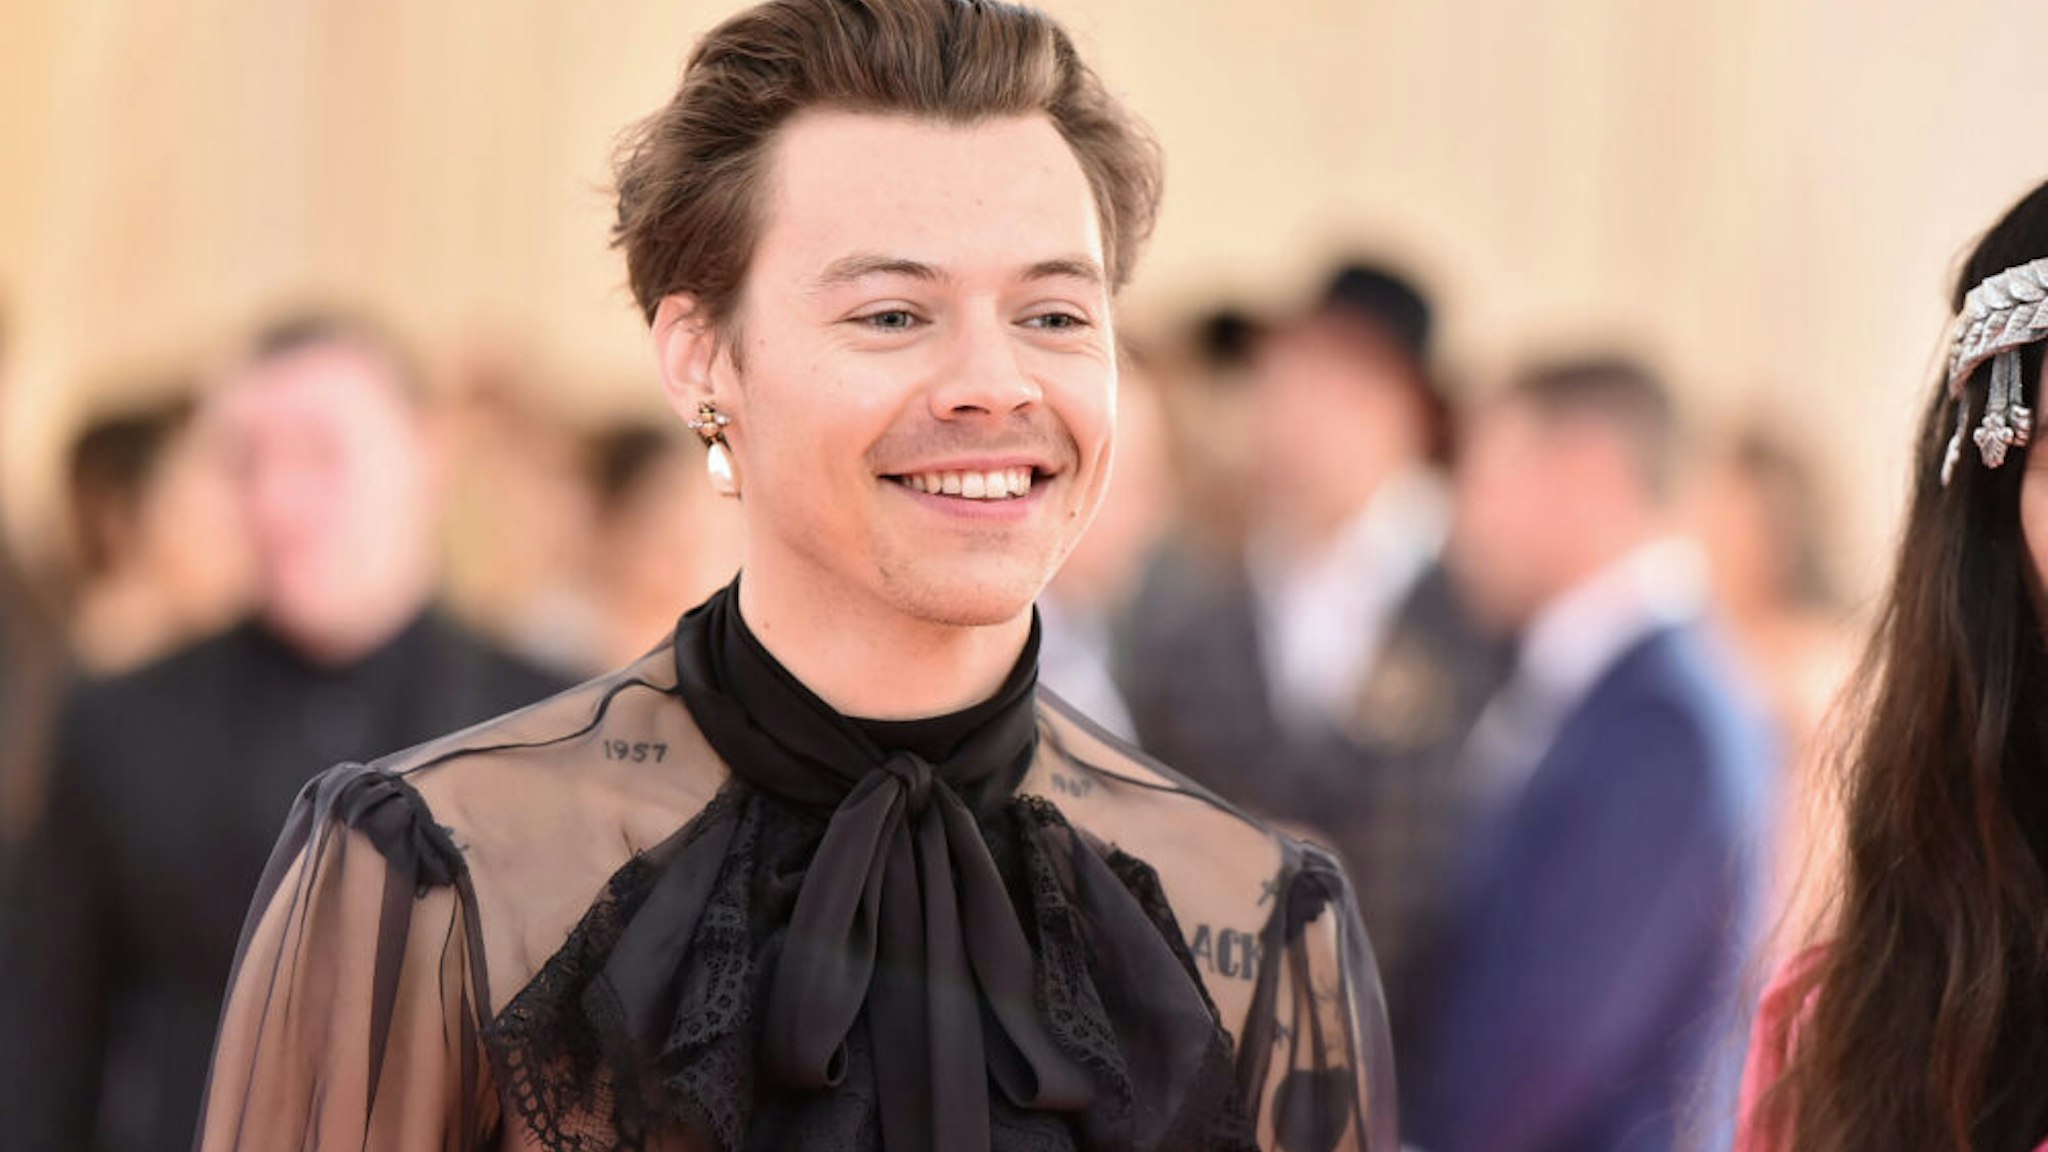 NEW YORK, NEW YORK - MAY 06: Harry Styles attends The 2019 Met Gala Celebrating Camp: Notes on Fashion at Metropolitan Museum of Art on May 06, 2019 in New York City.